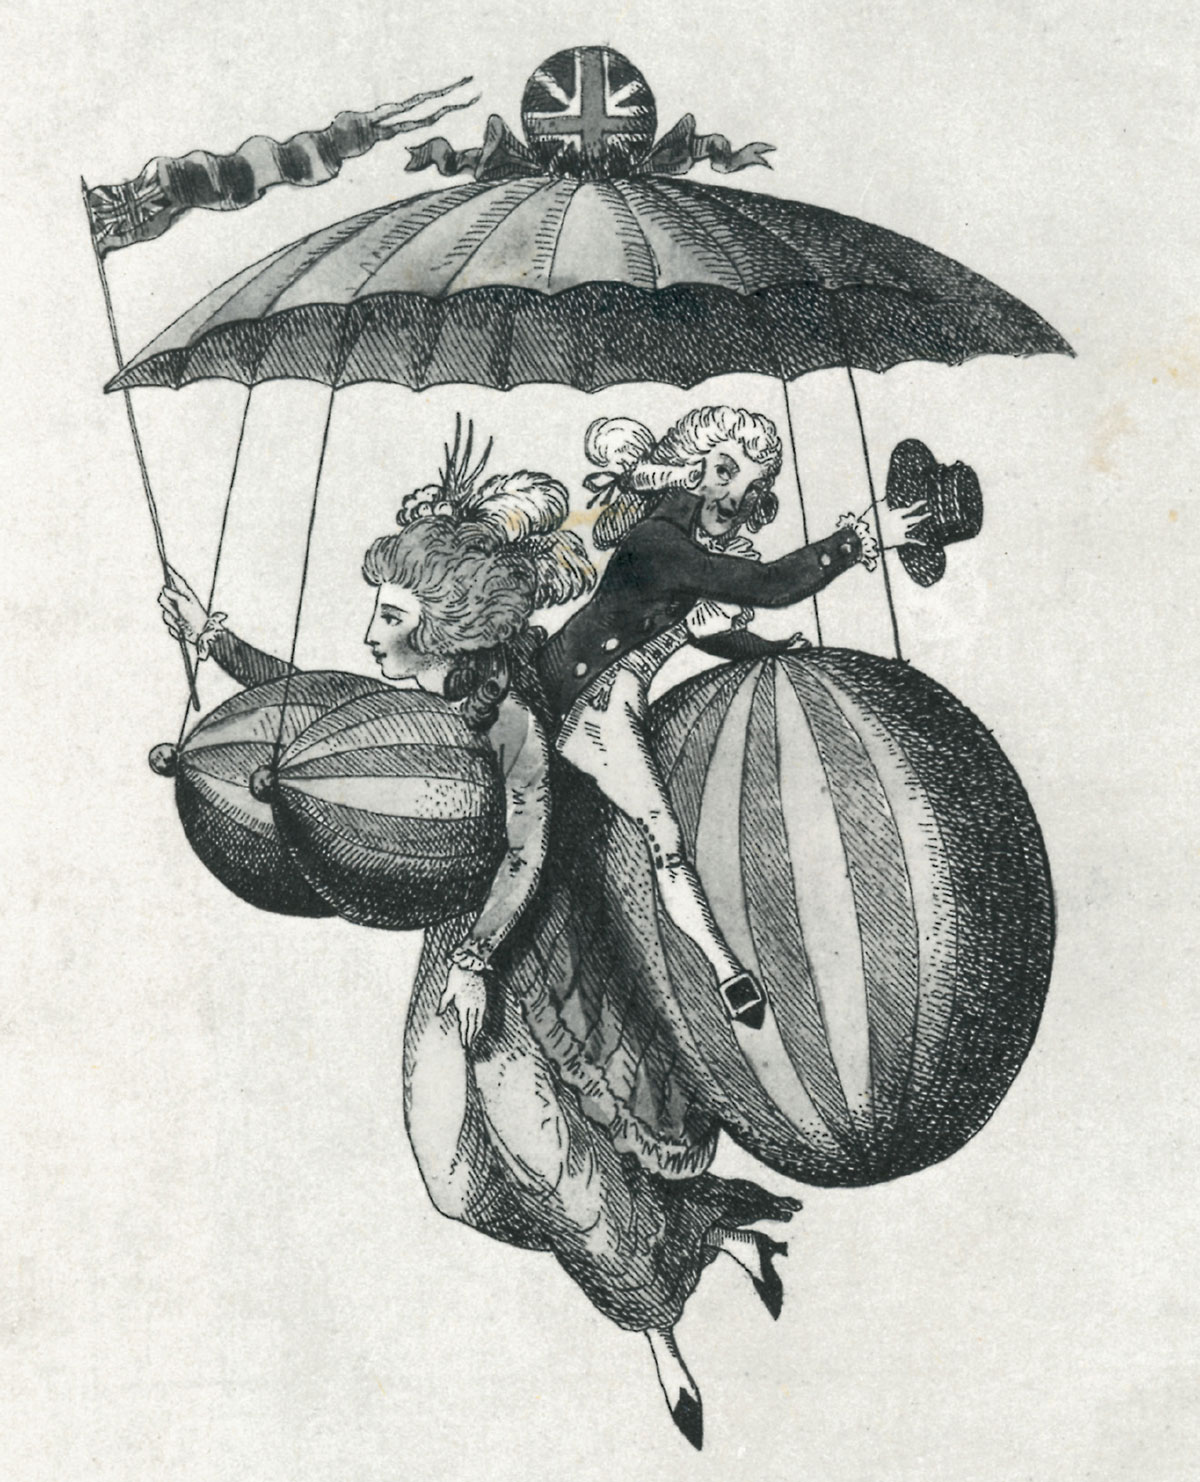 Cartoon from the 1780s depicting a woman's breasts and buttocks as enlarged hot air balloons, on which a man is traveling.